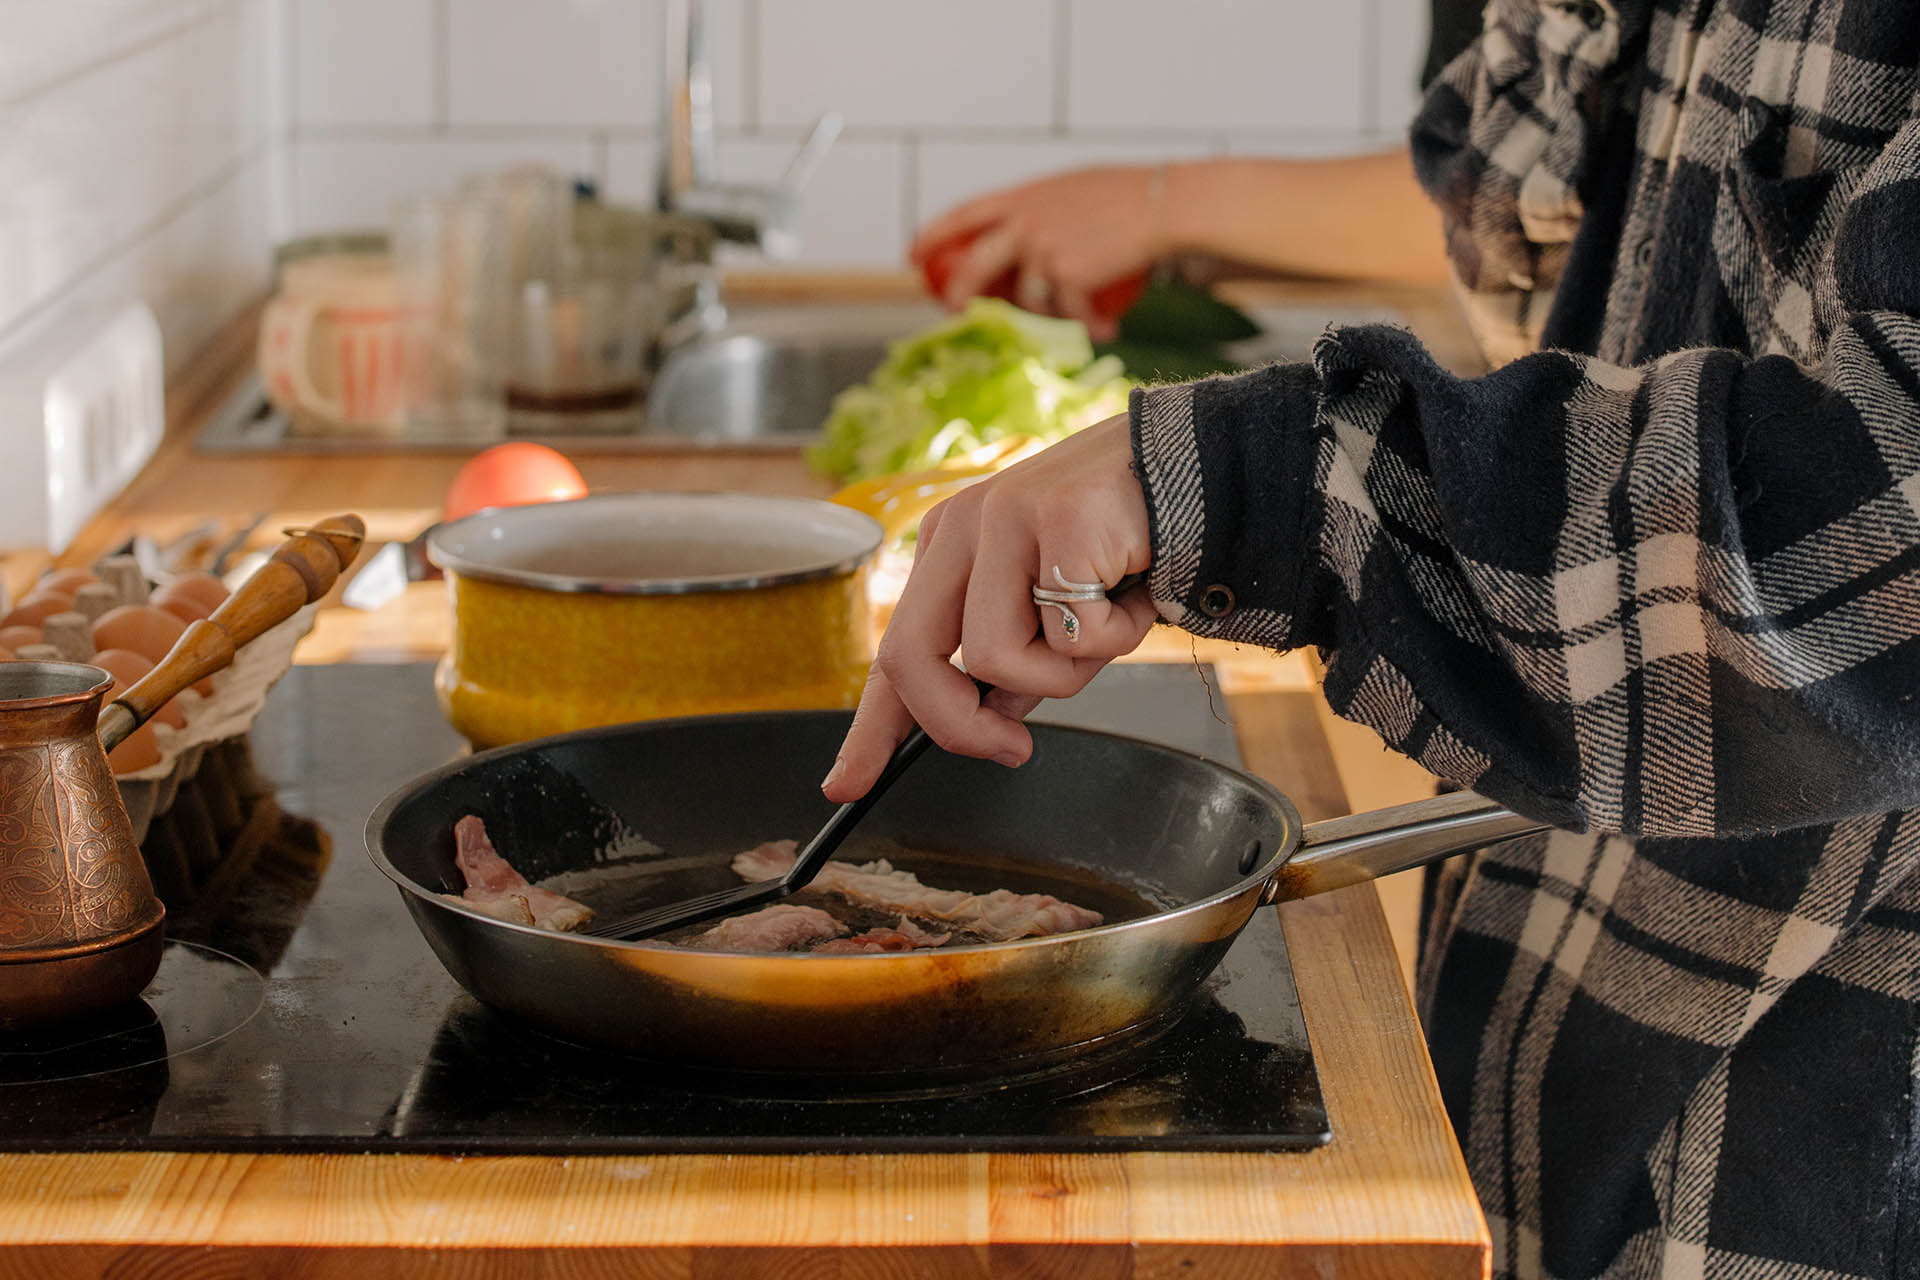 A person is standing by the stove in a checkered shirt, frying bacon in a frying pan.